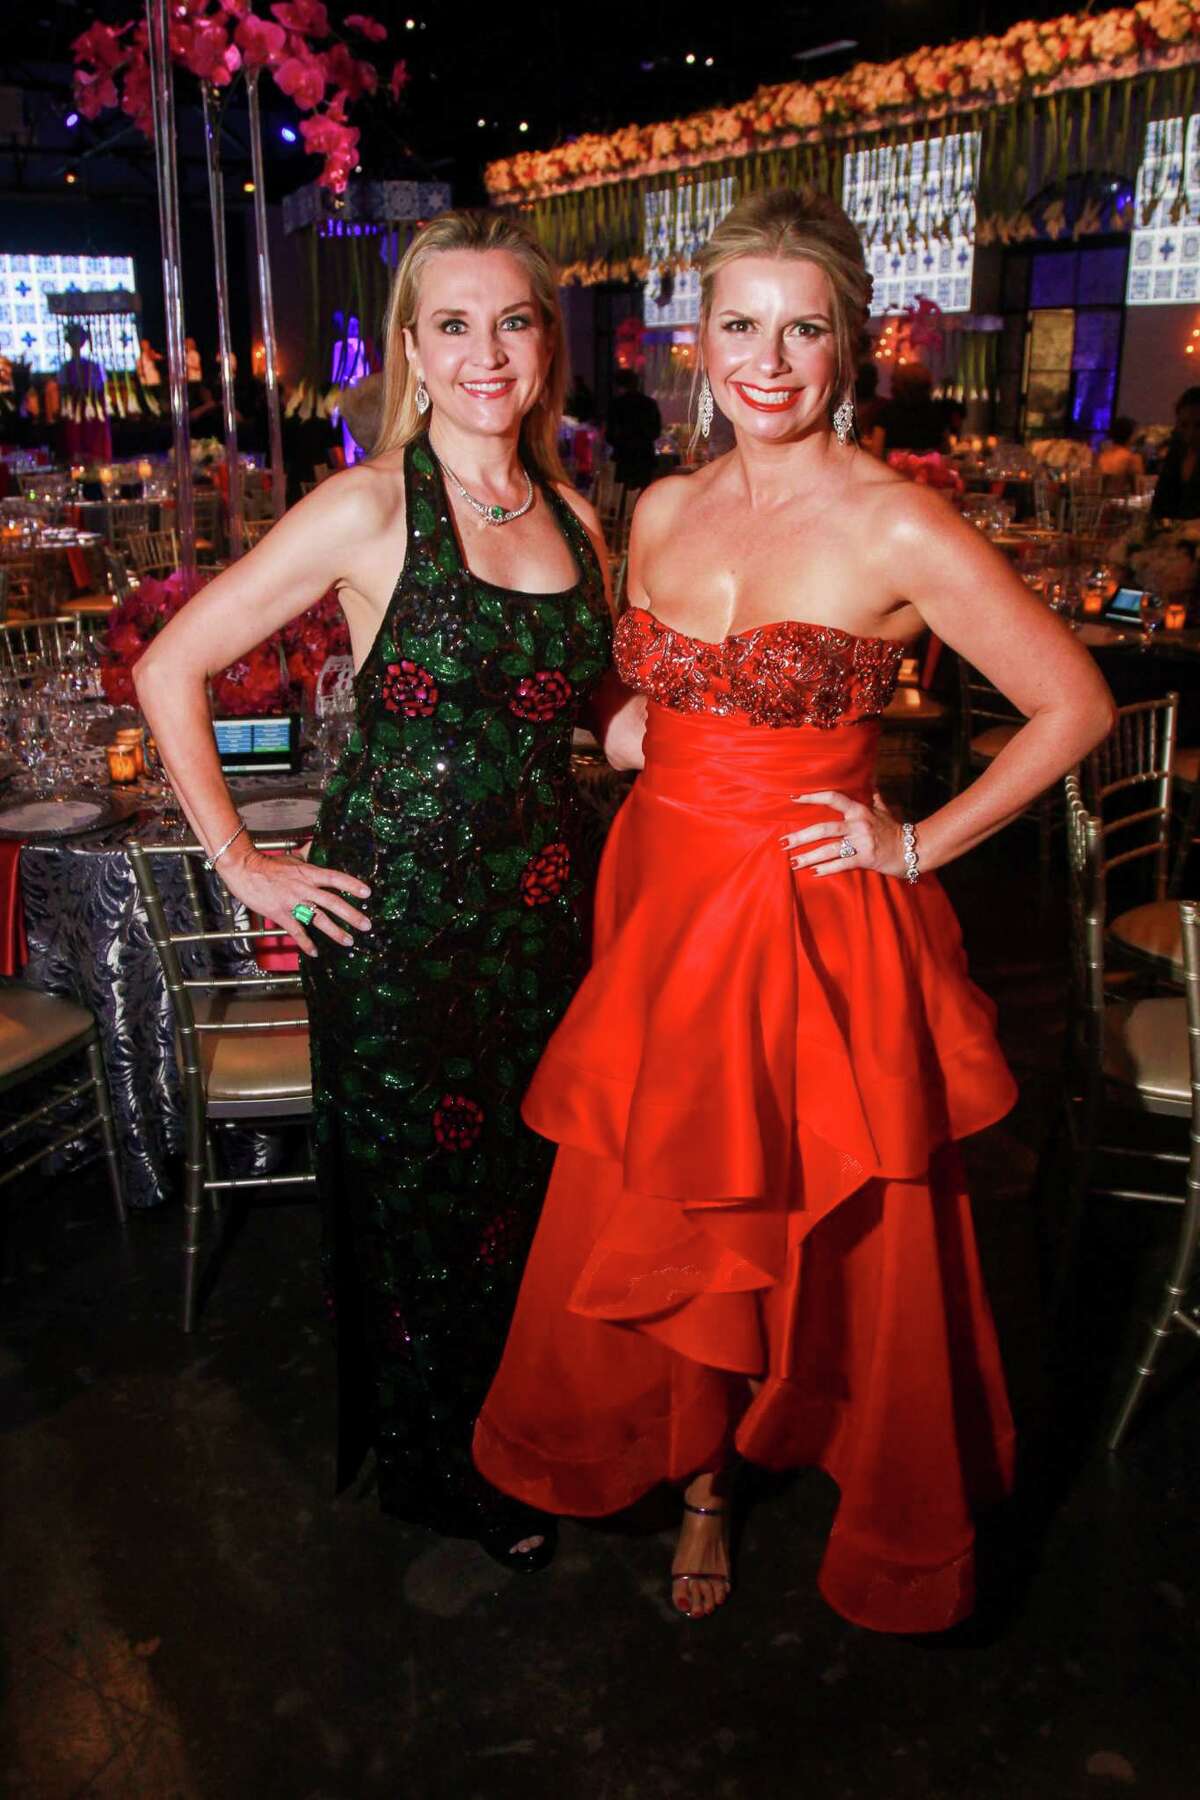 Mary D'Andrea, left, and Valerie Dieterich at the Opera Ball.